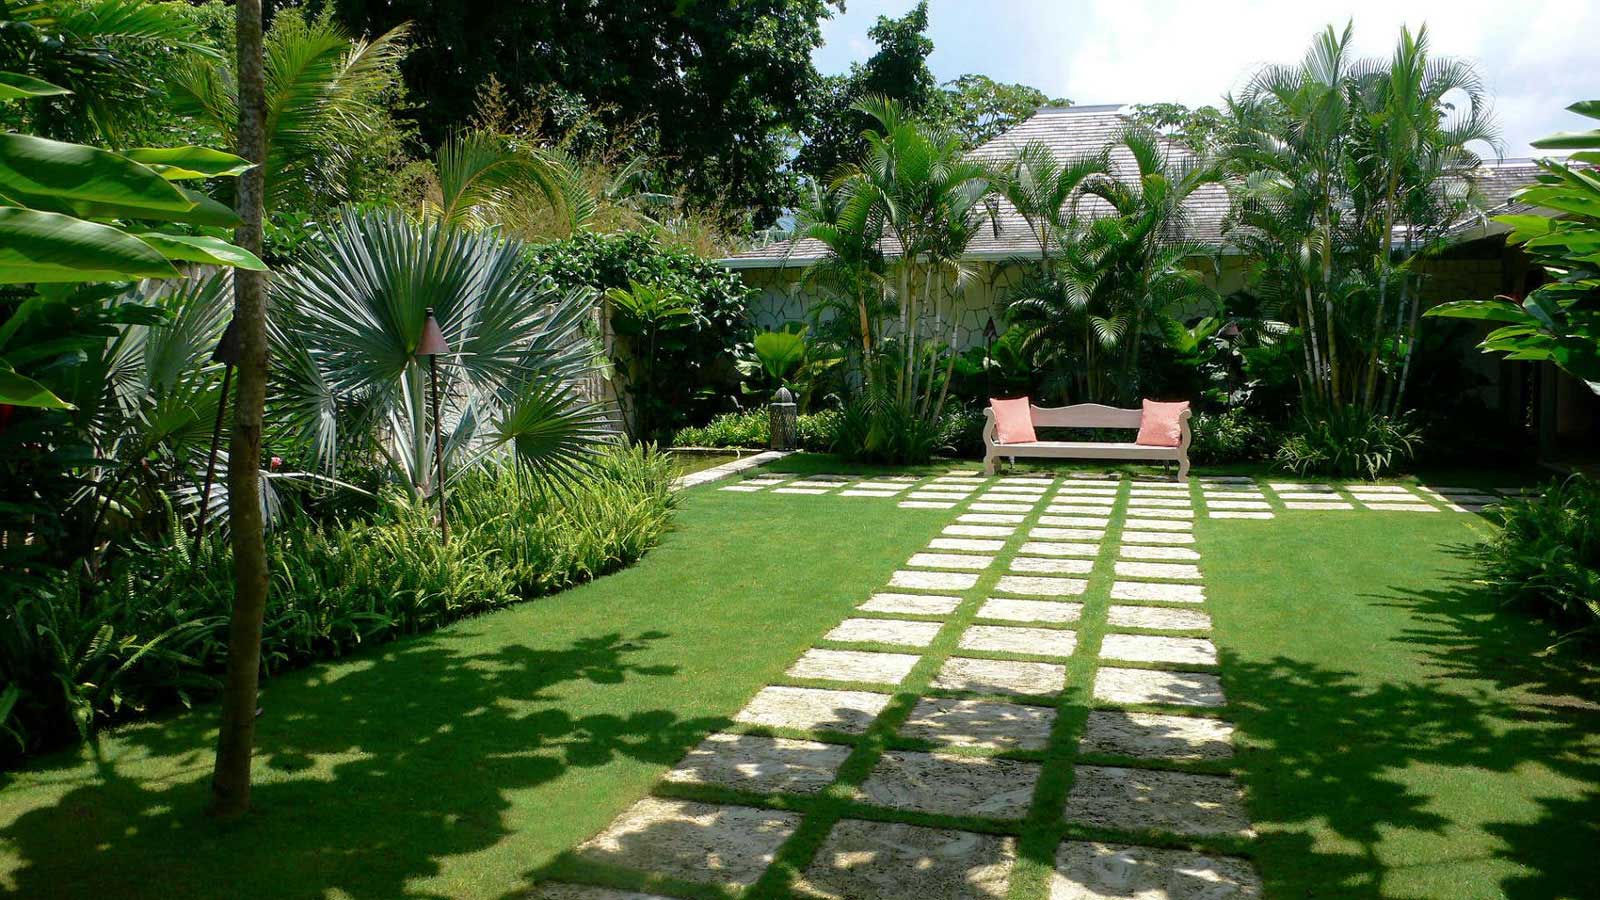 Landscape Design Concrete Backyard Landscape Design Decorated With Concrete Tile Flooring For Pathway And Green Garden For Landscaping Design Ideas Outdoor Backyard Landscape Design To Make The Most Of Your Space